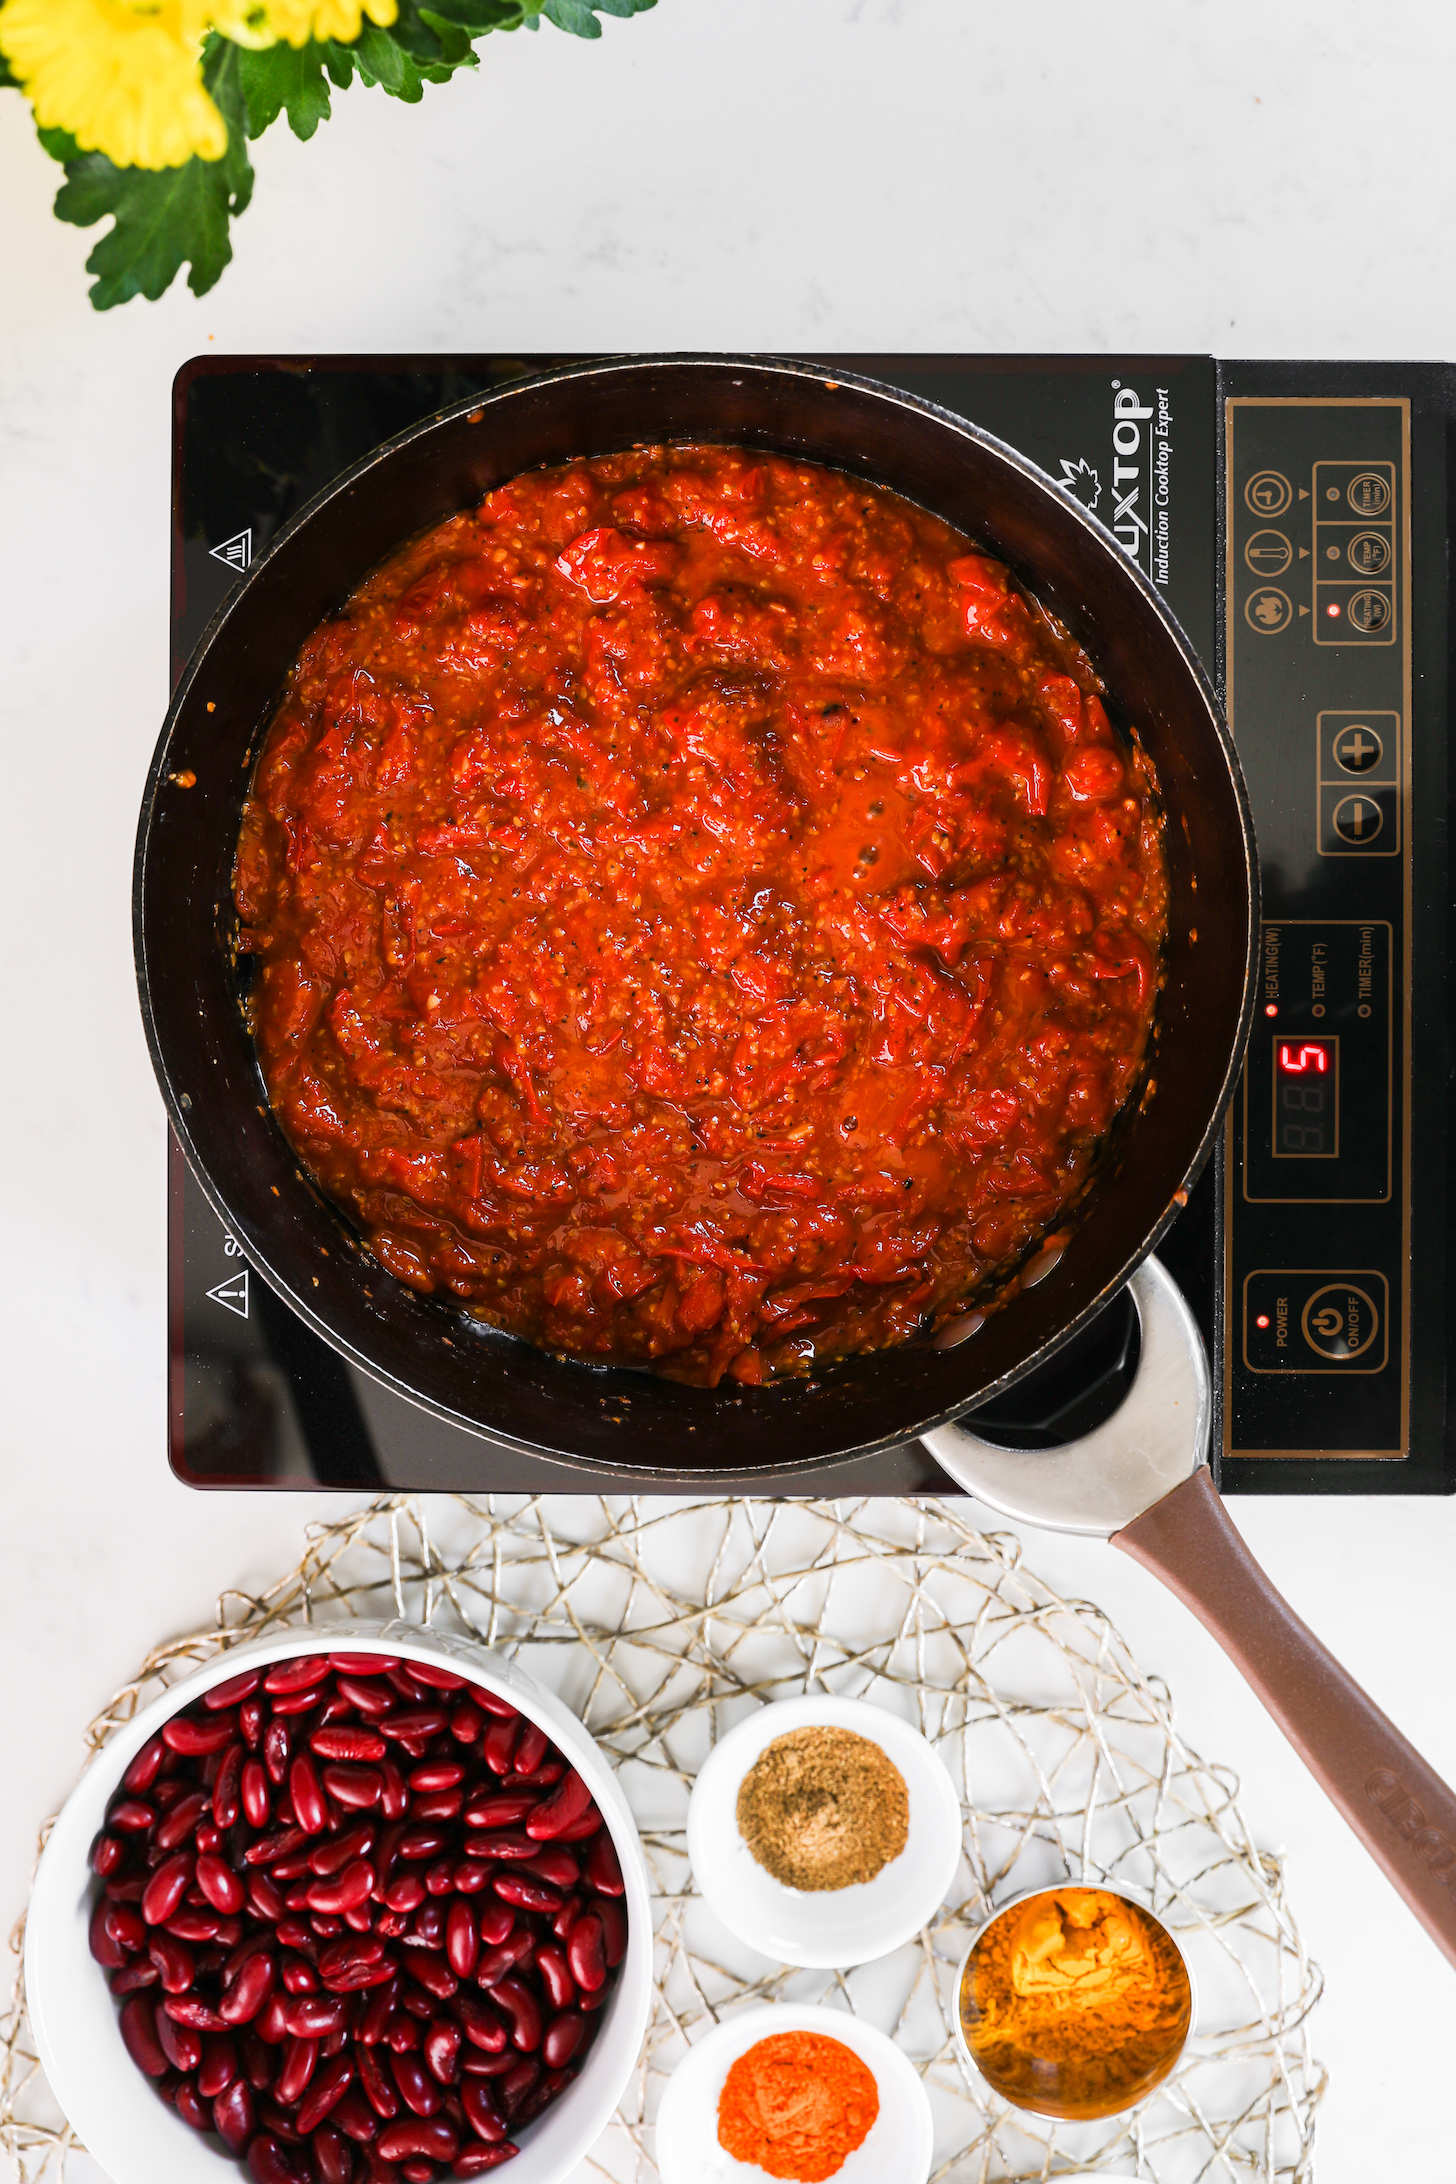 A pan of tomato sauce on a mobile cooktop with food ingredients close by.